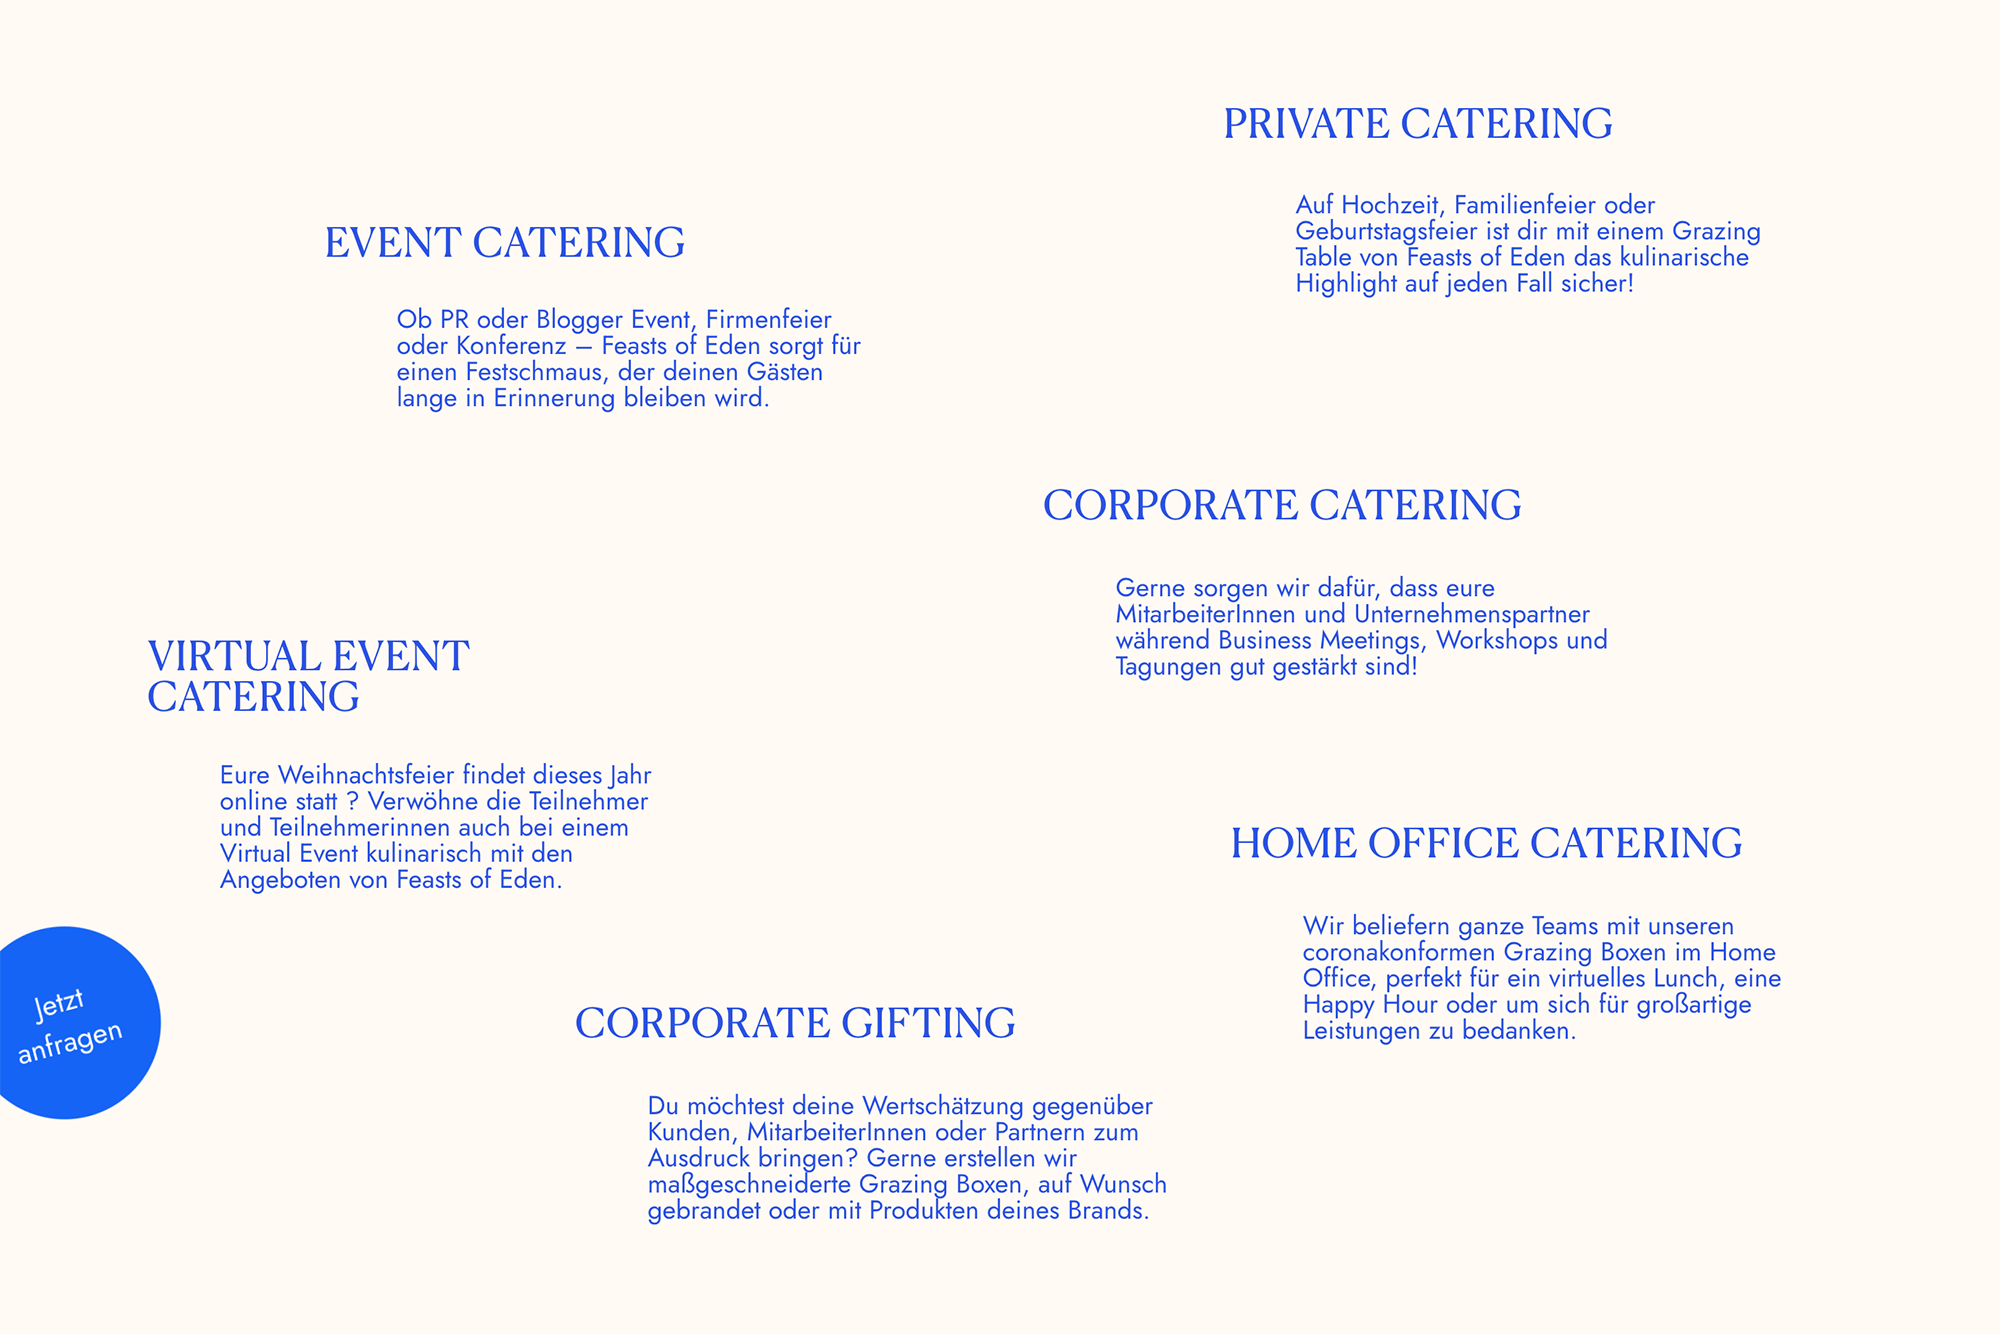 Feasts of Eden catering and food delivery website design and development by NO BORDERS studio